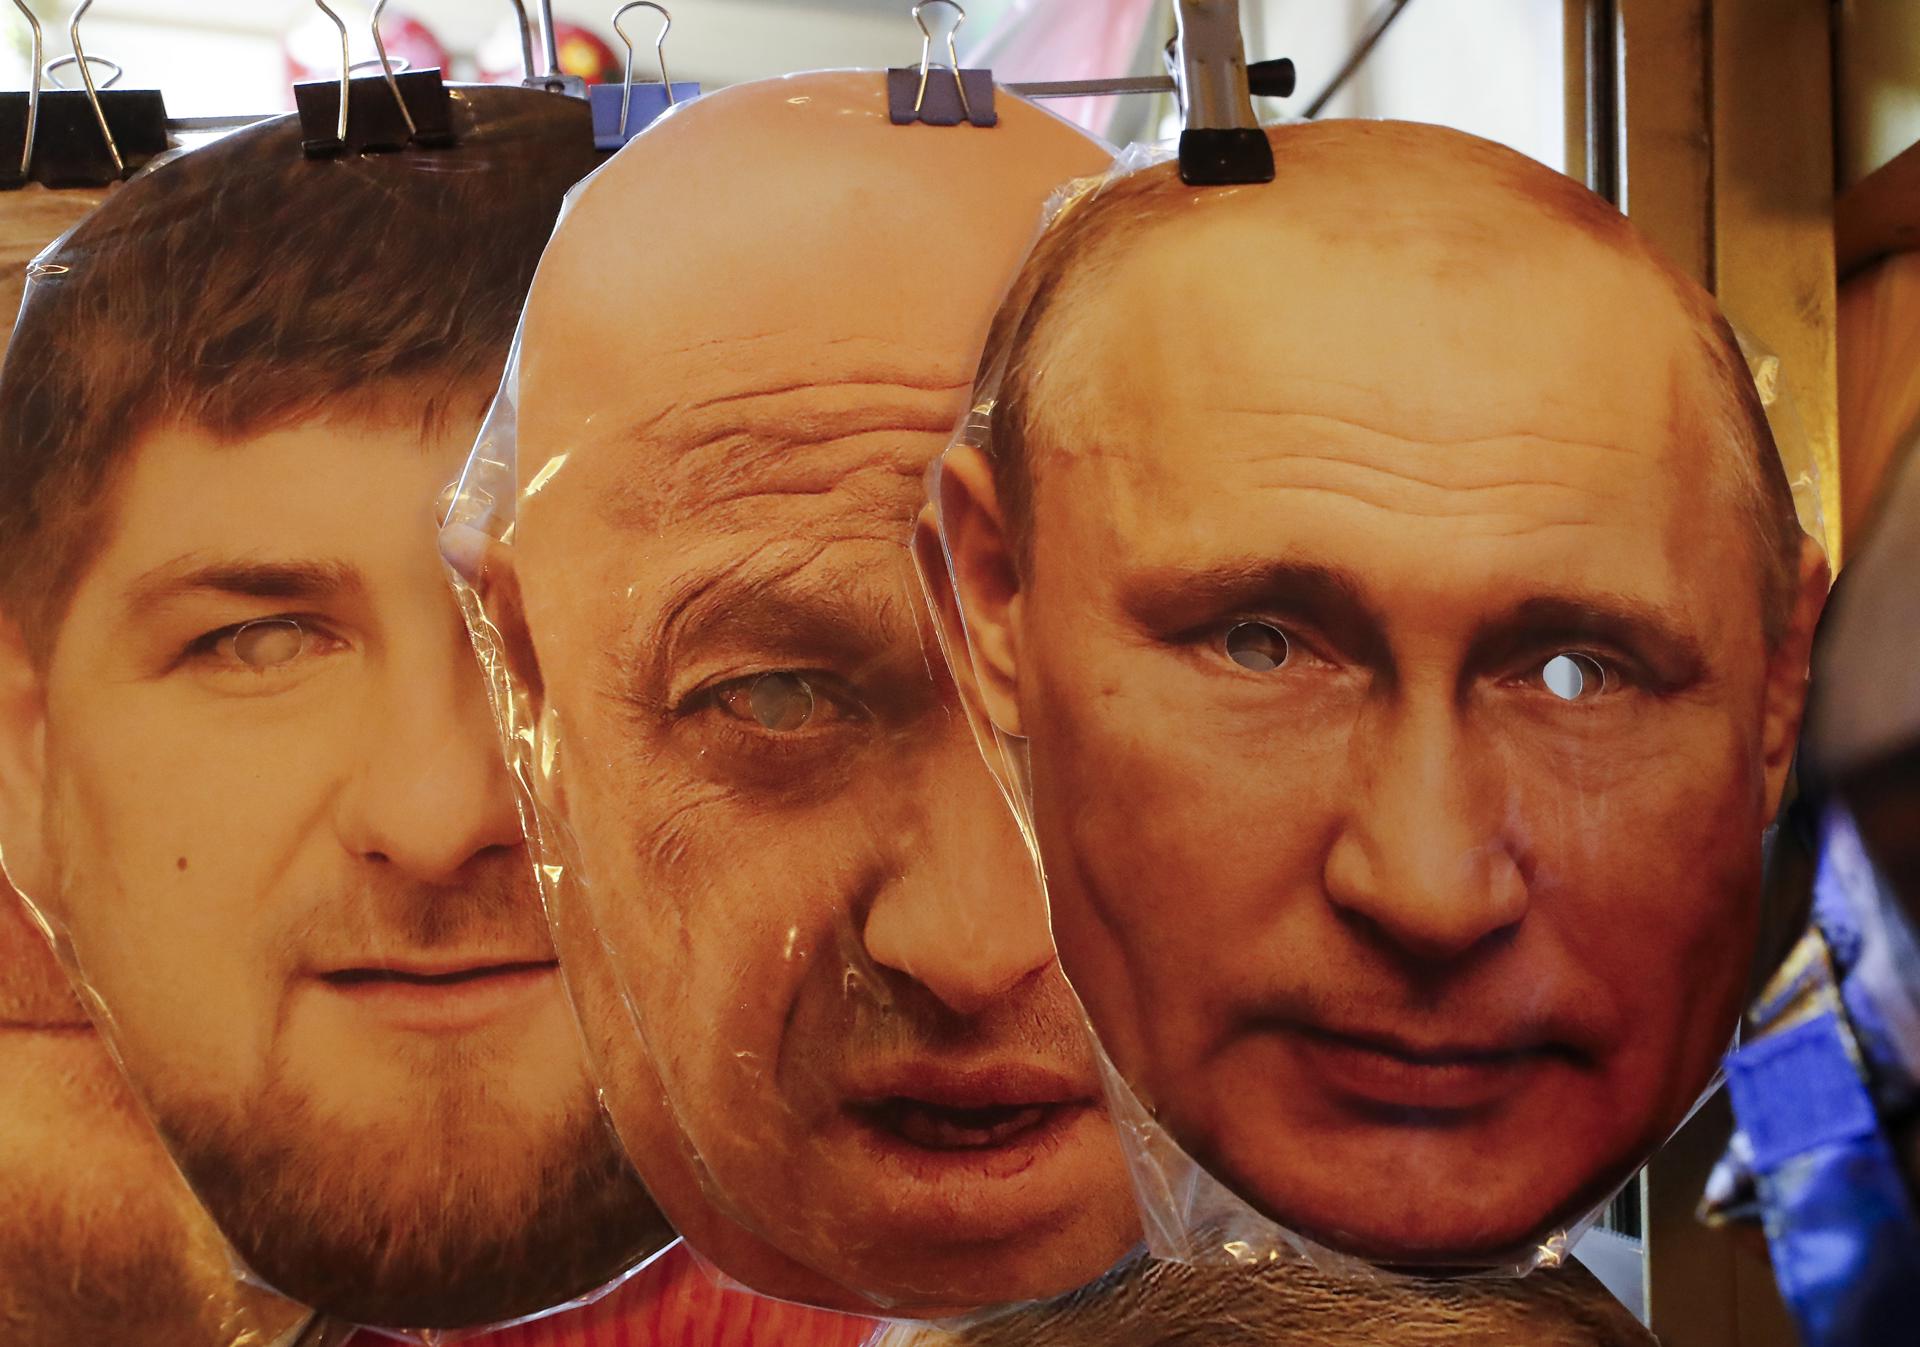 (L-R) Face masks depicting Chechen Republic's regional leader Ramzan Kadyrov, owner of PMC (Private Military Company) Wagner Yevgeny Prigozhin and Russian President Vladimir Putin are displayed for sale at a souvenir market in St. Petersburg, Russia, 26 June 2023. EFE-EPA/ANATOLY MALTSEV